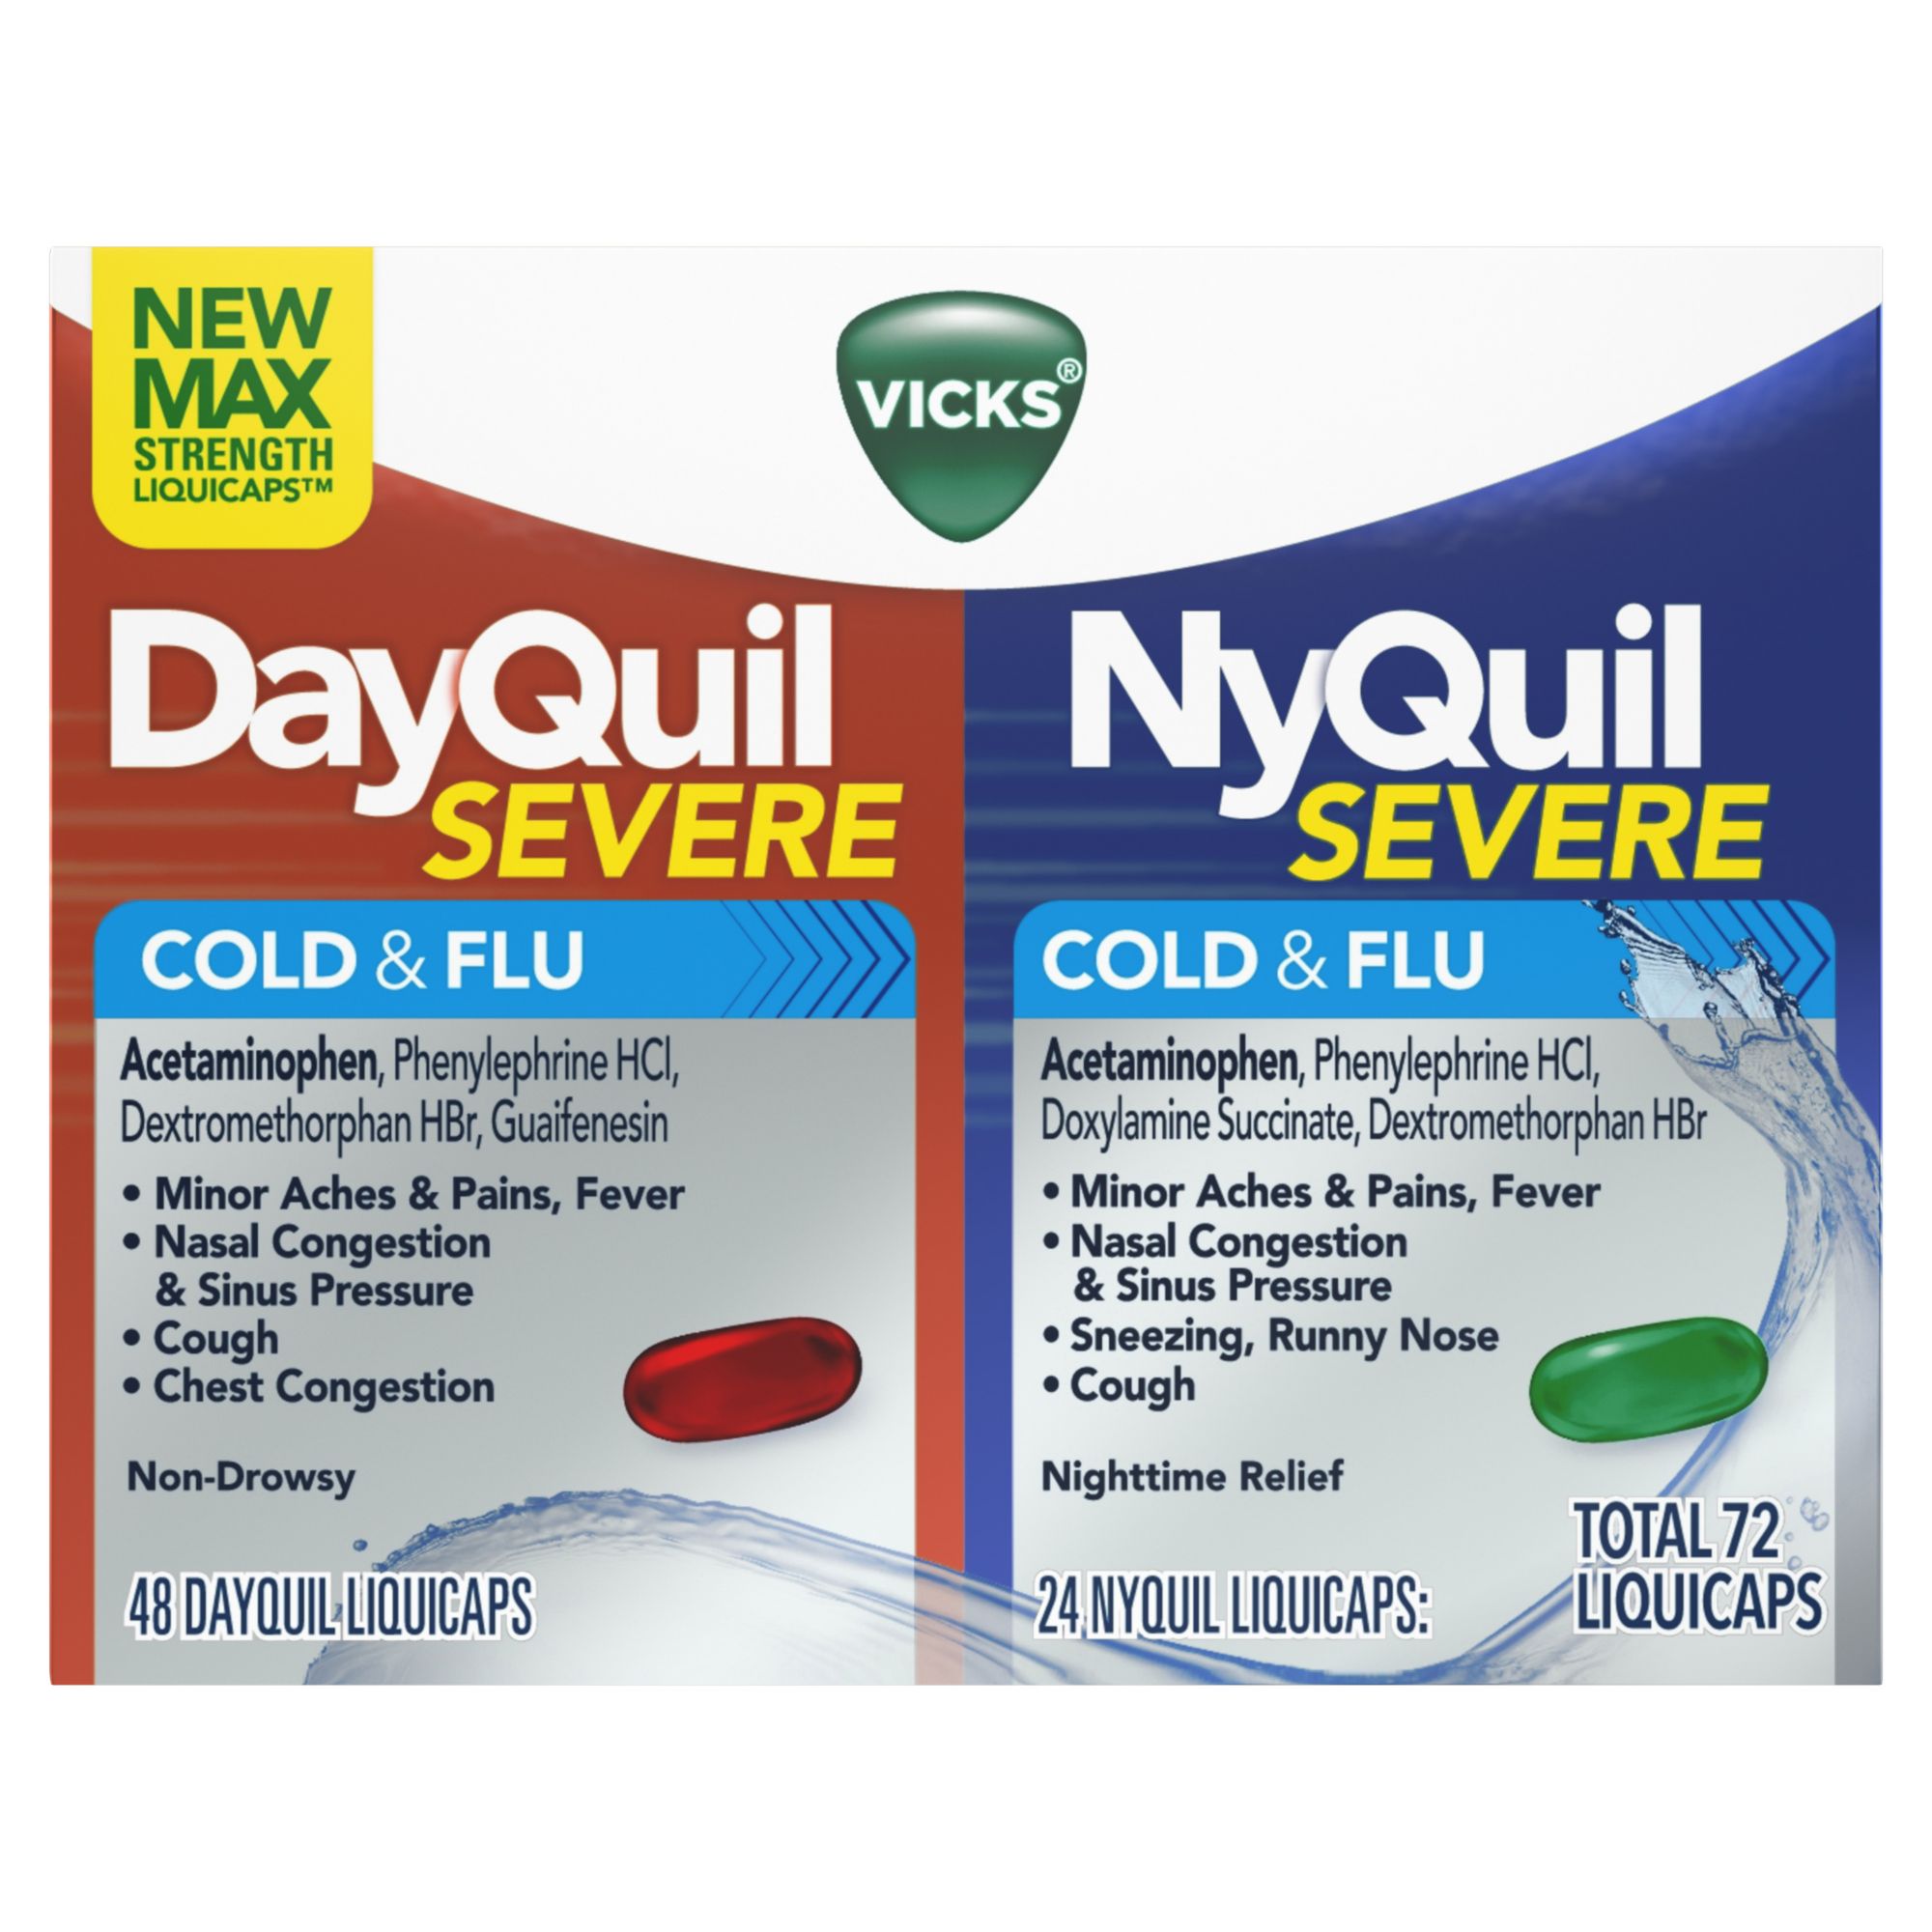 Vicks DayQuil/NyQuil Severe Cold & Flu Relief LiquiCaps Combo Pack, 72 ct.